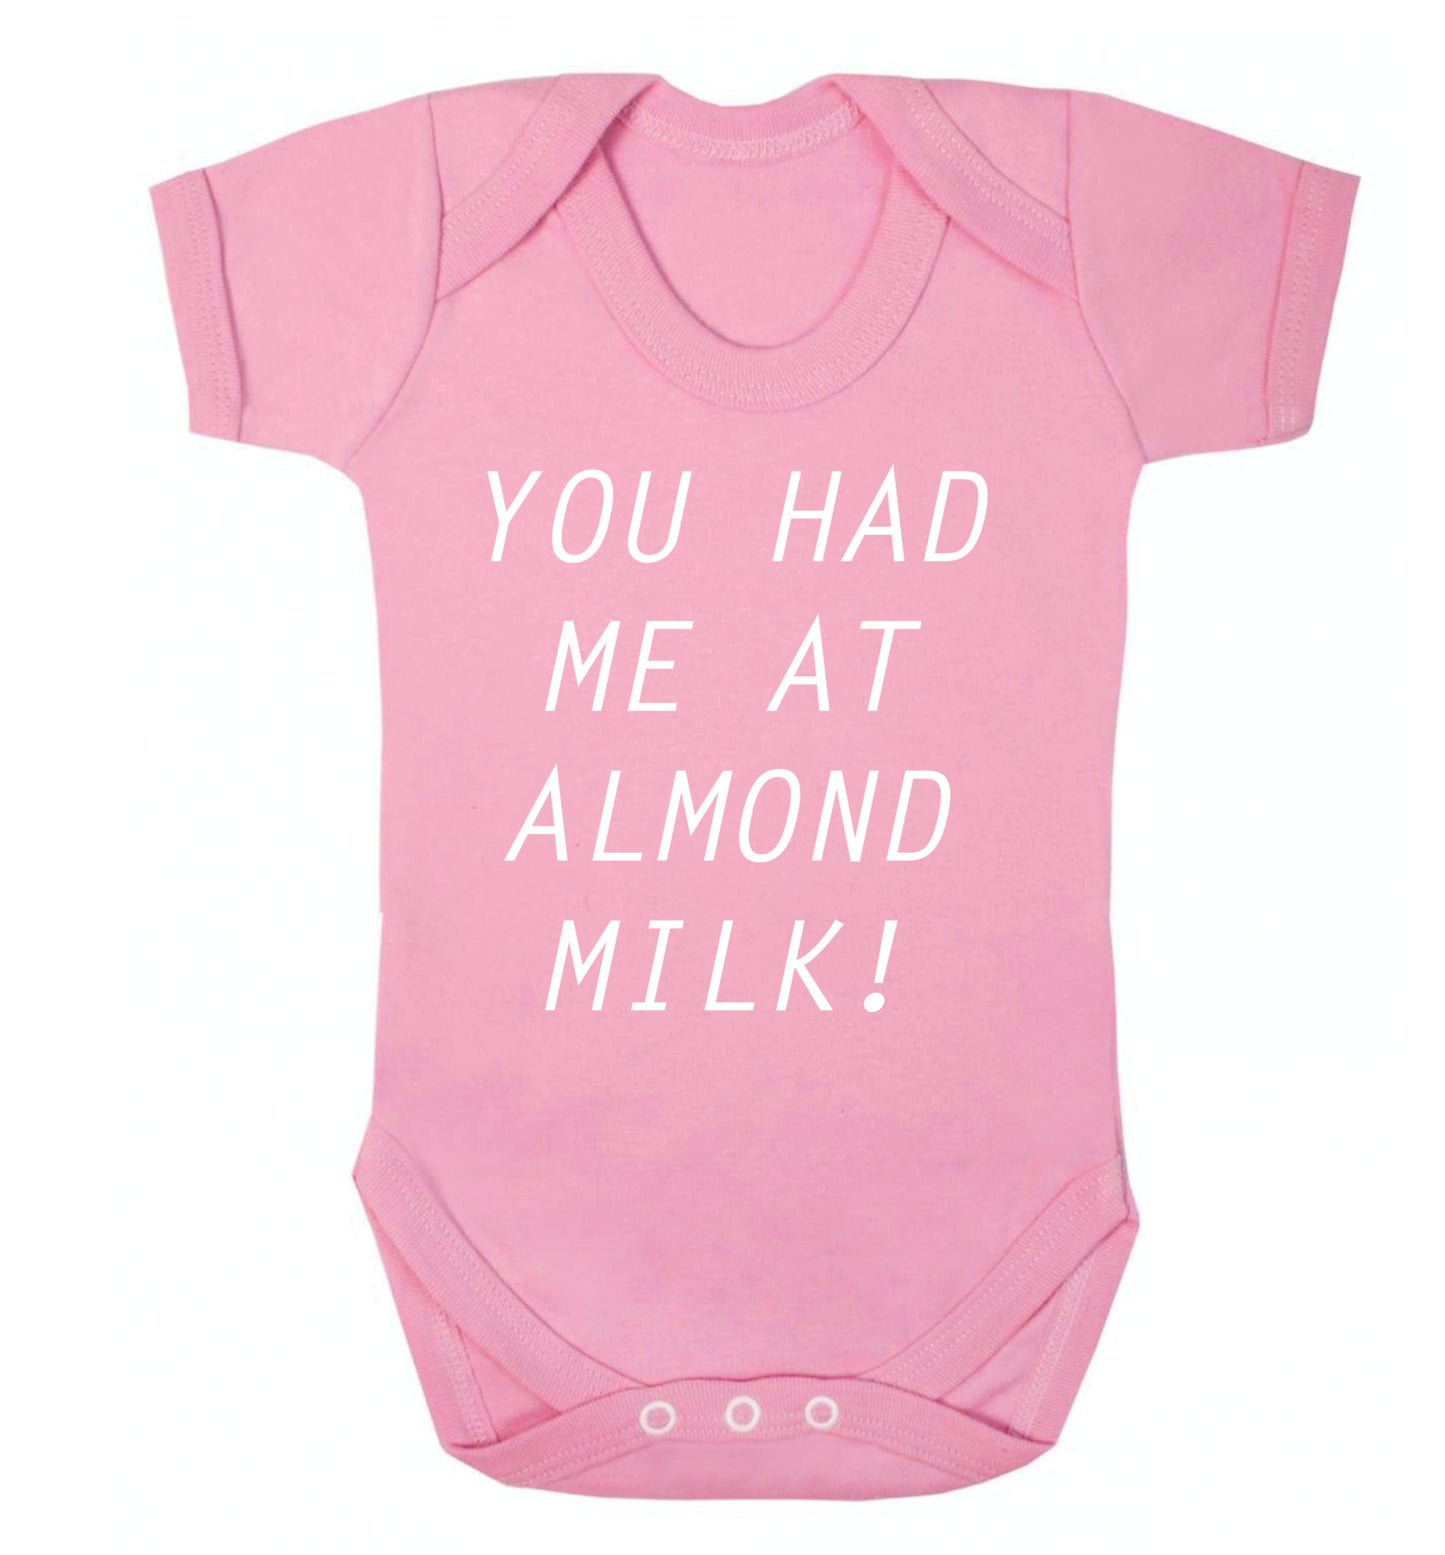 You had me at almond milk Baby Vest pale pink 18-24 months